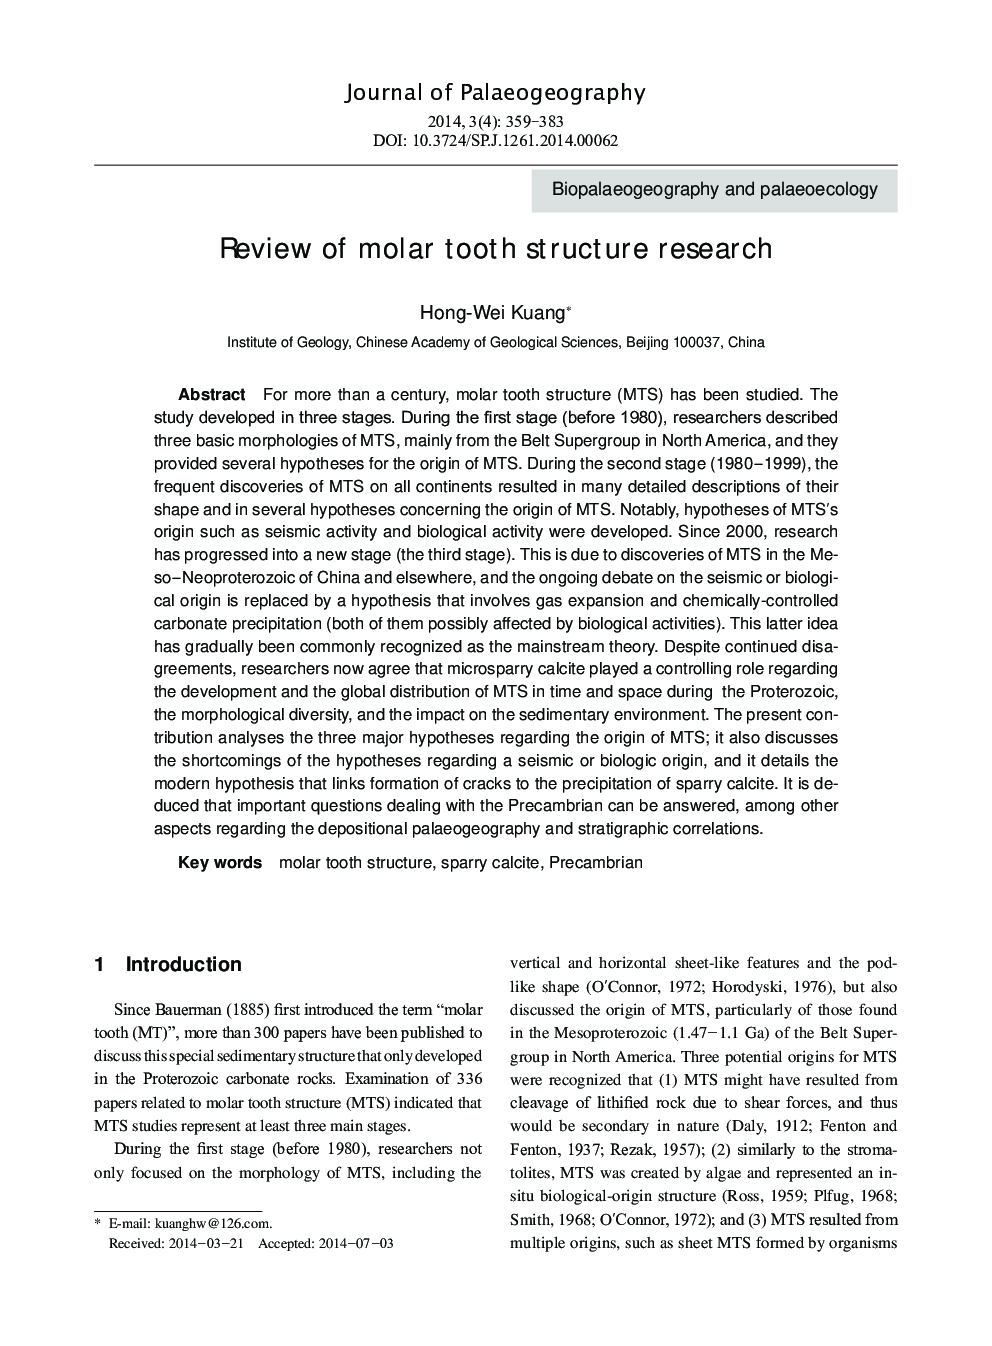 Review of molar tooth structure research